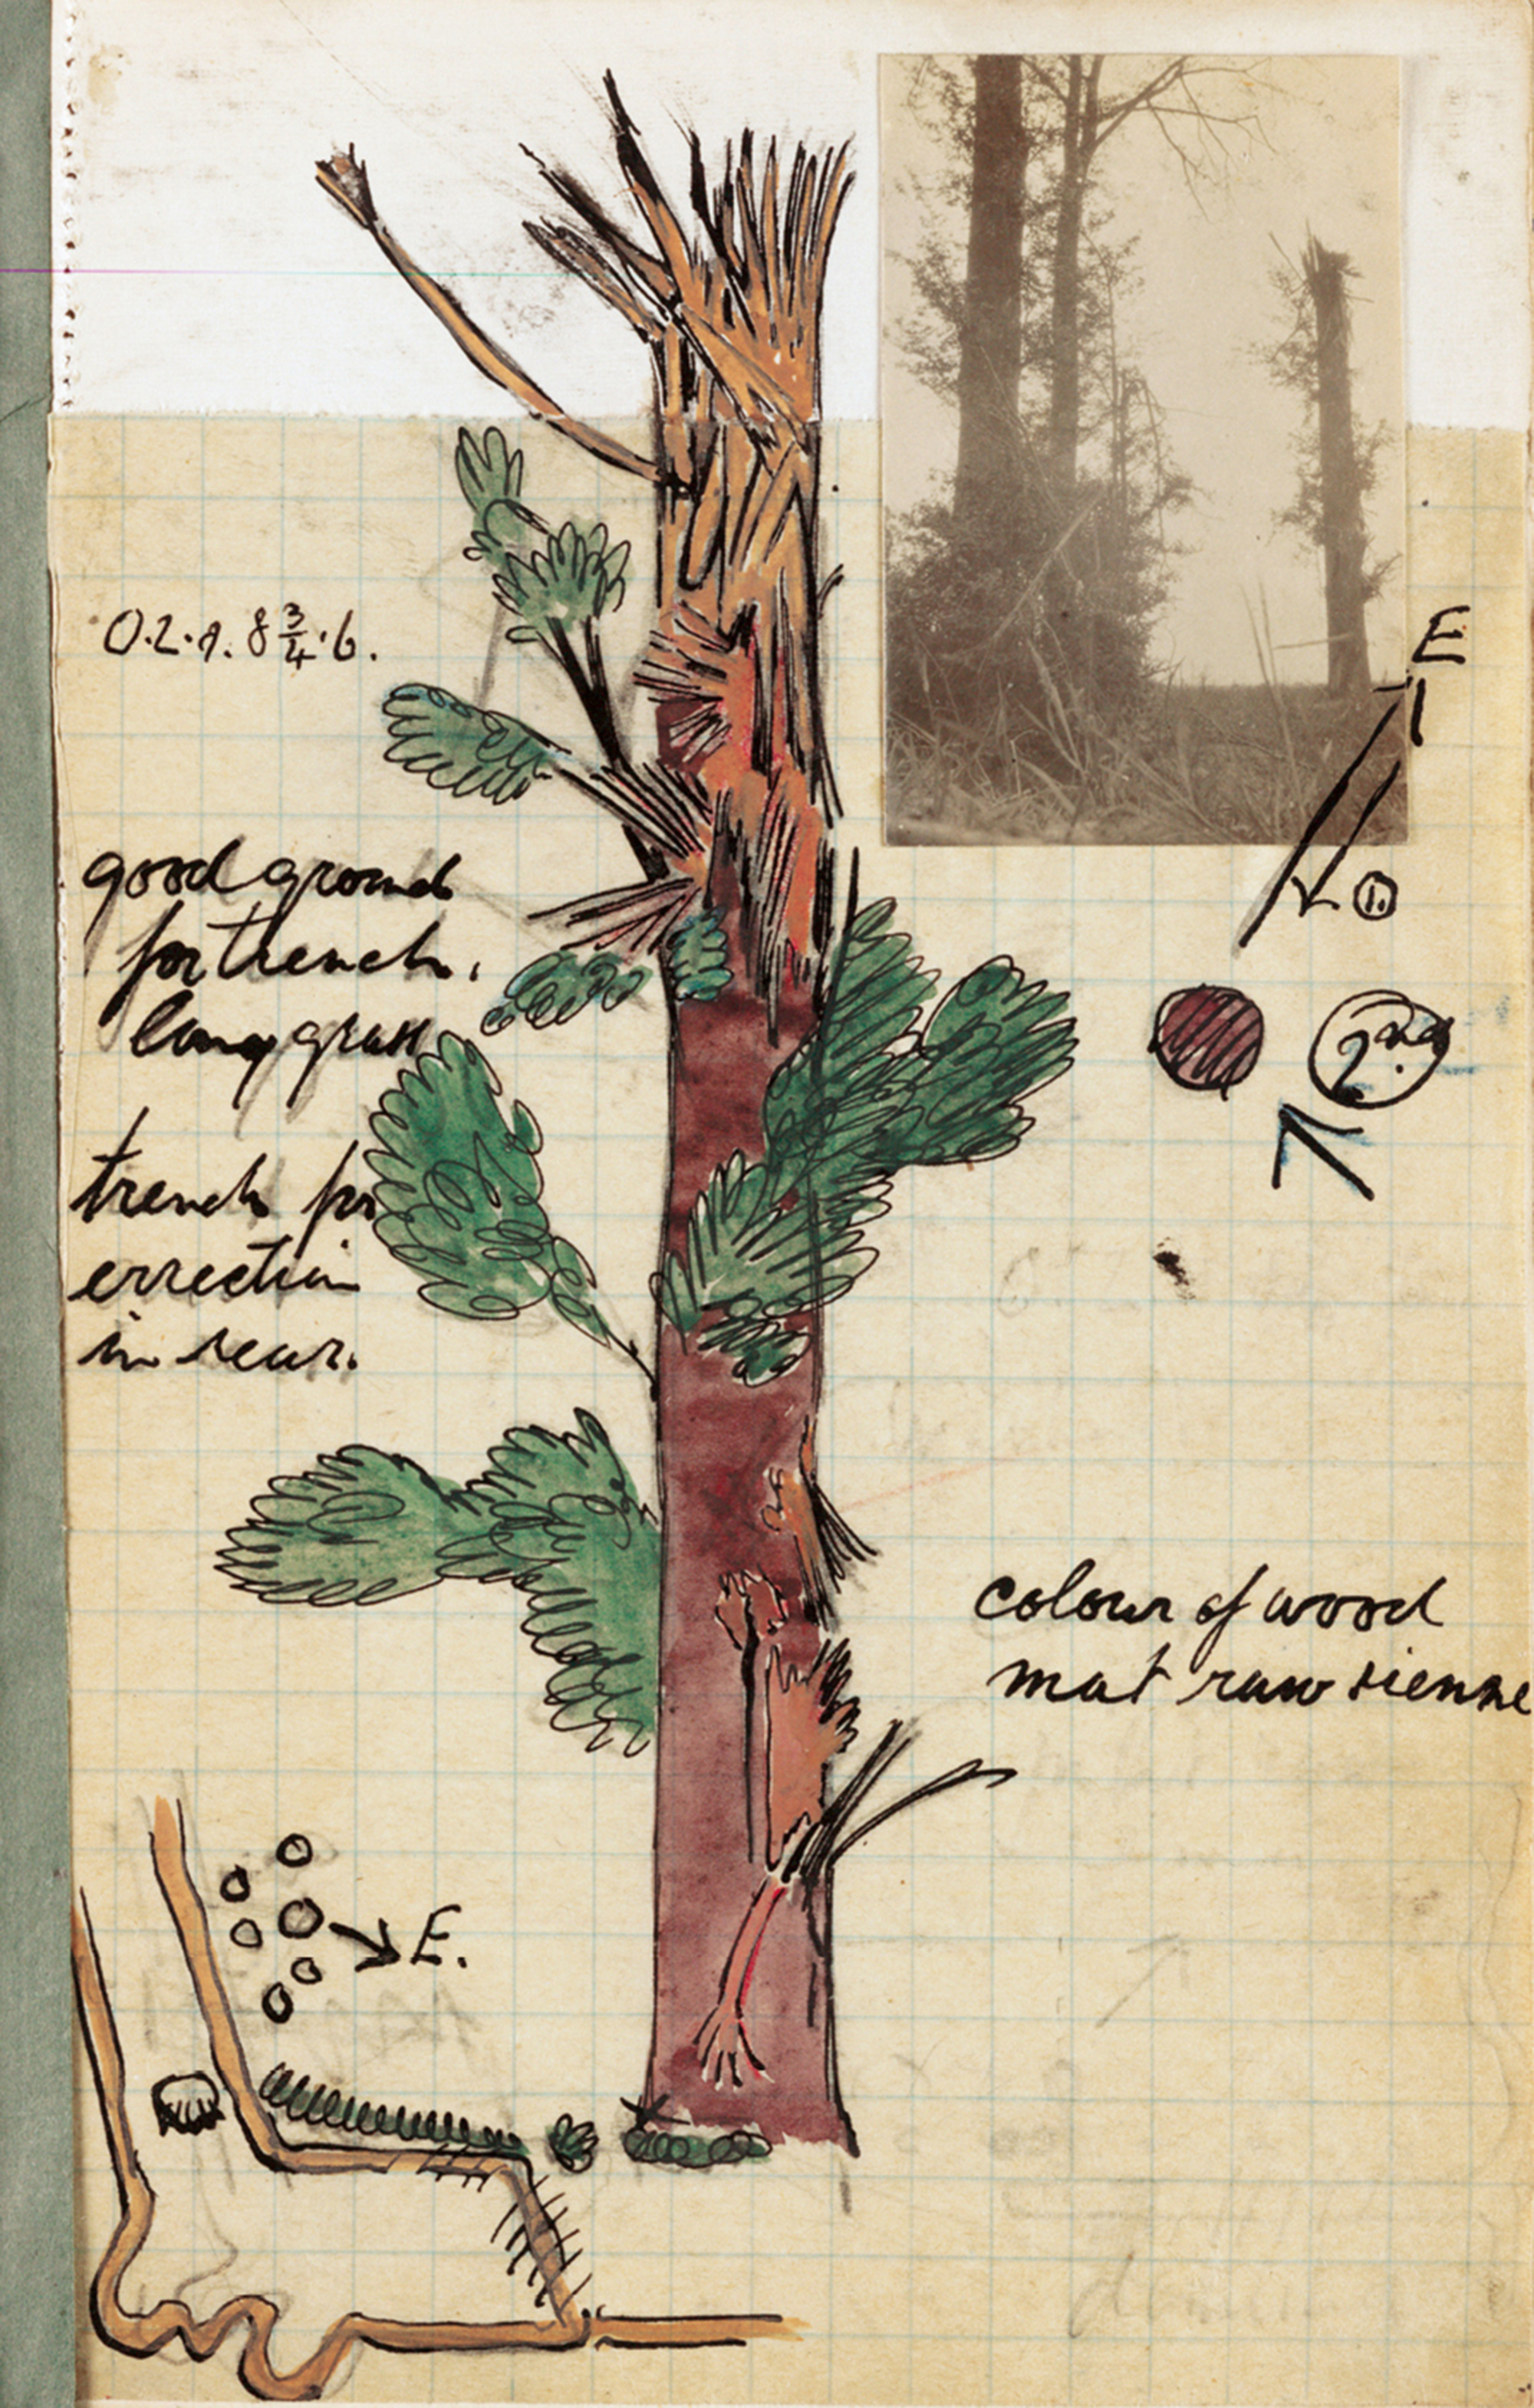 Drawing with collaged photograph from Leon Underwood’s notebook showing details of a tree that would later serve as the model for a camouflage observation post. The arrowed E indicates the enemy’s view of the tree. All images this page courtesy Imperial War Museum, London.